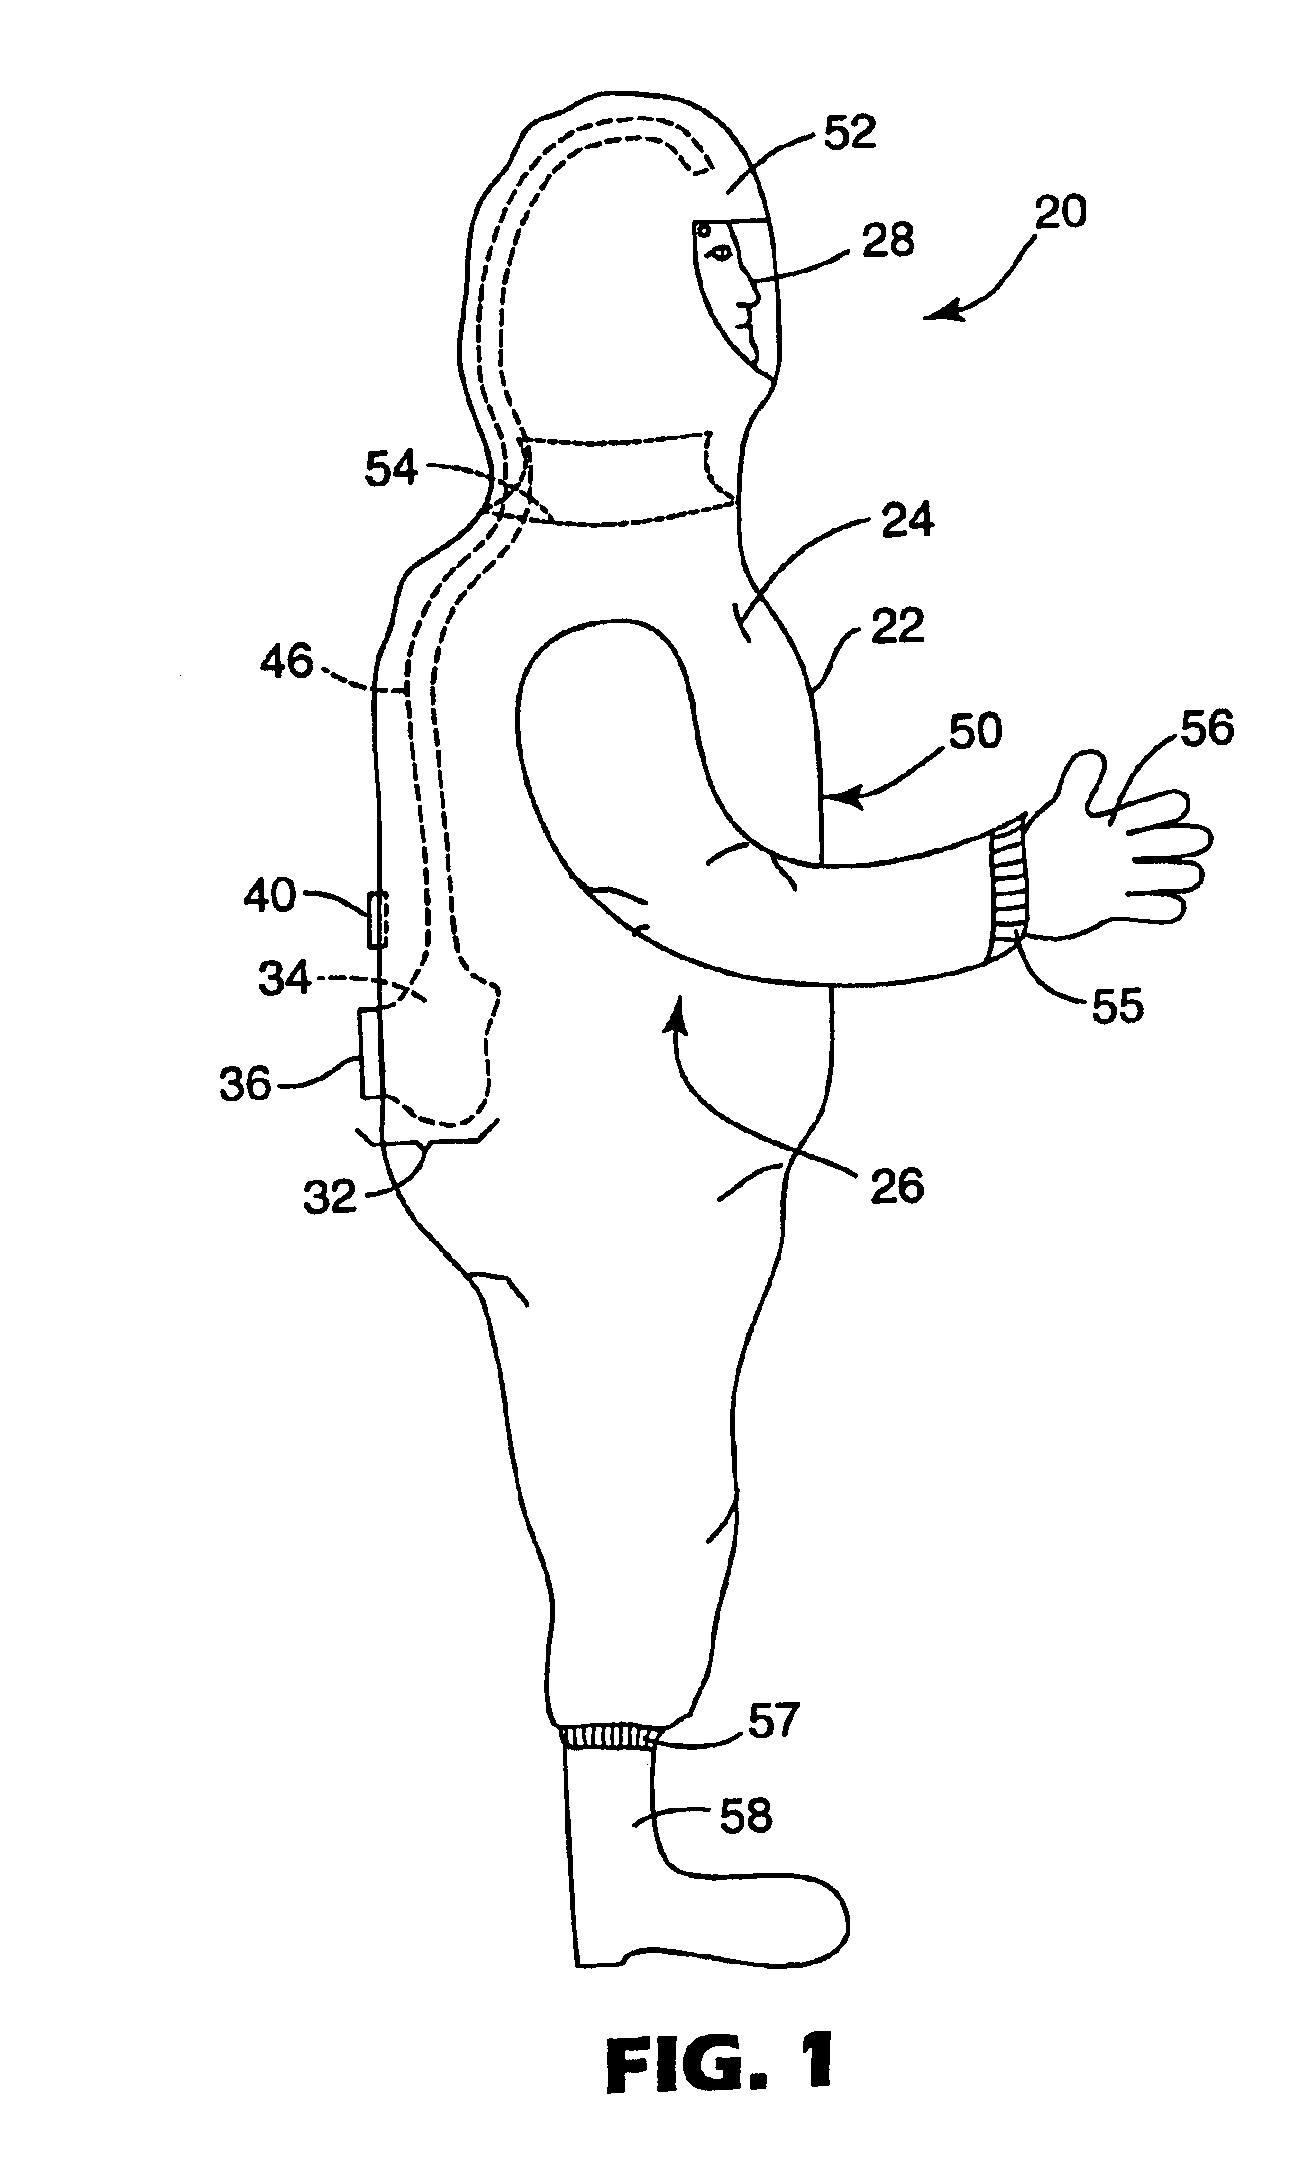 Personal protective suit with partial flow restriction